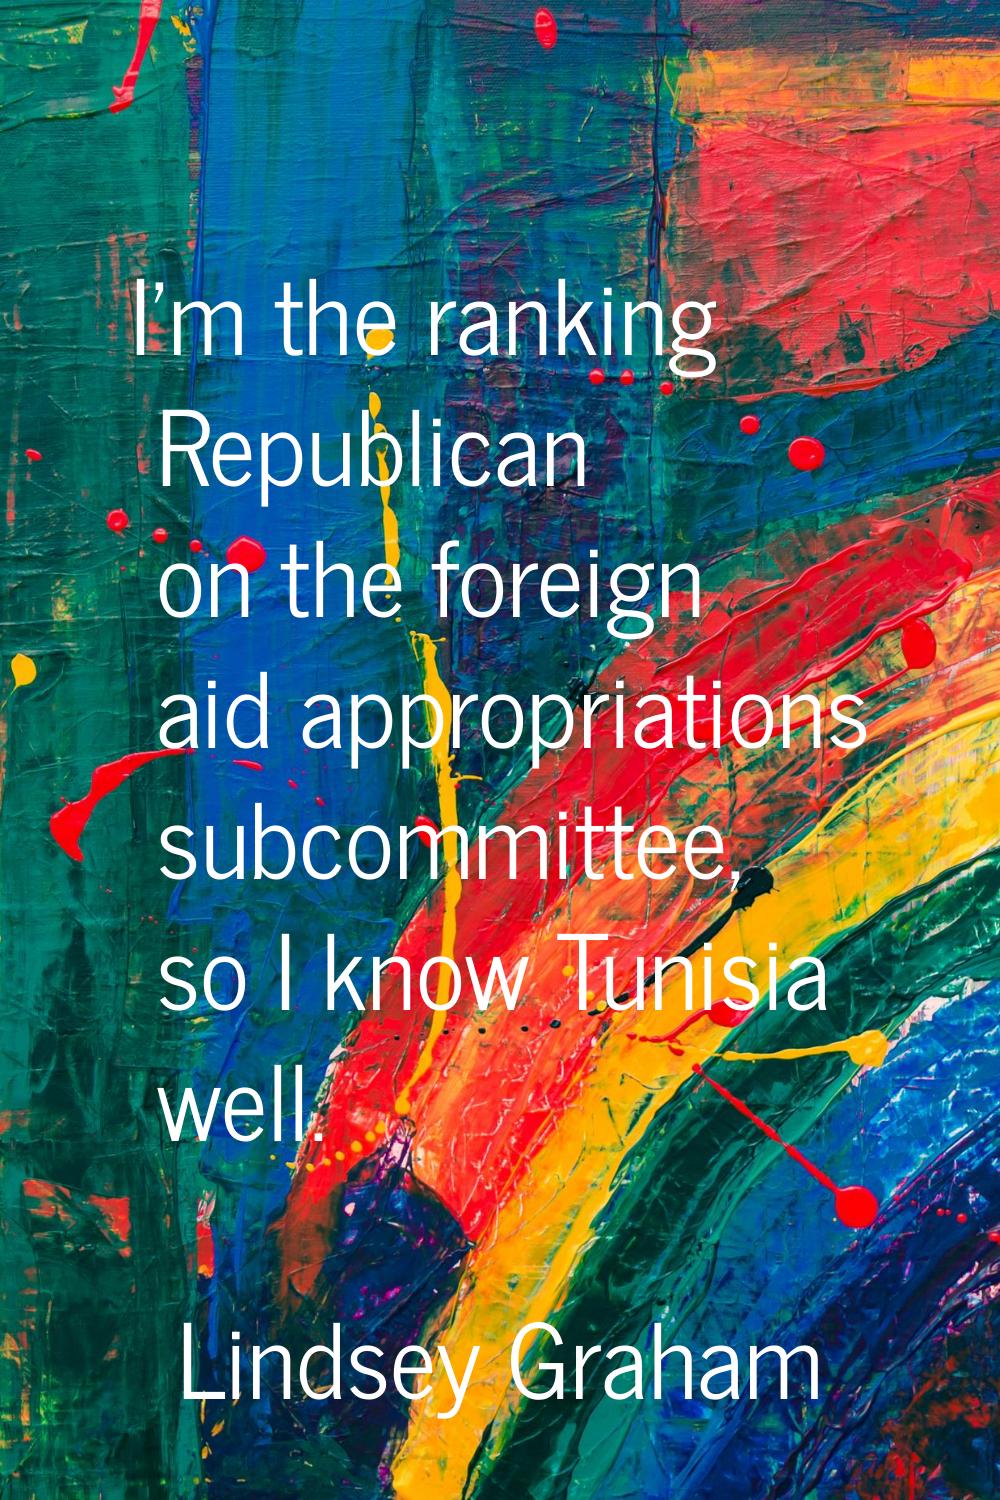 I'm the ranking Republican on the foreign aid appropriations subcommittee, so I know Tunisia well.